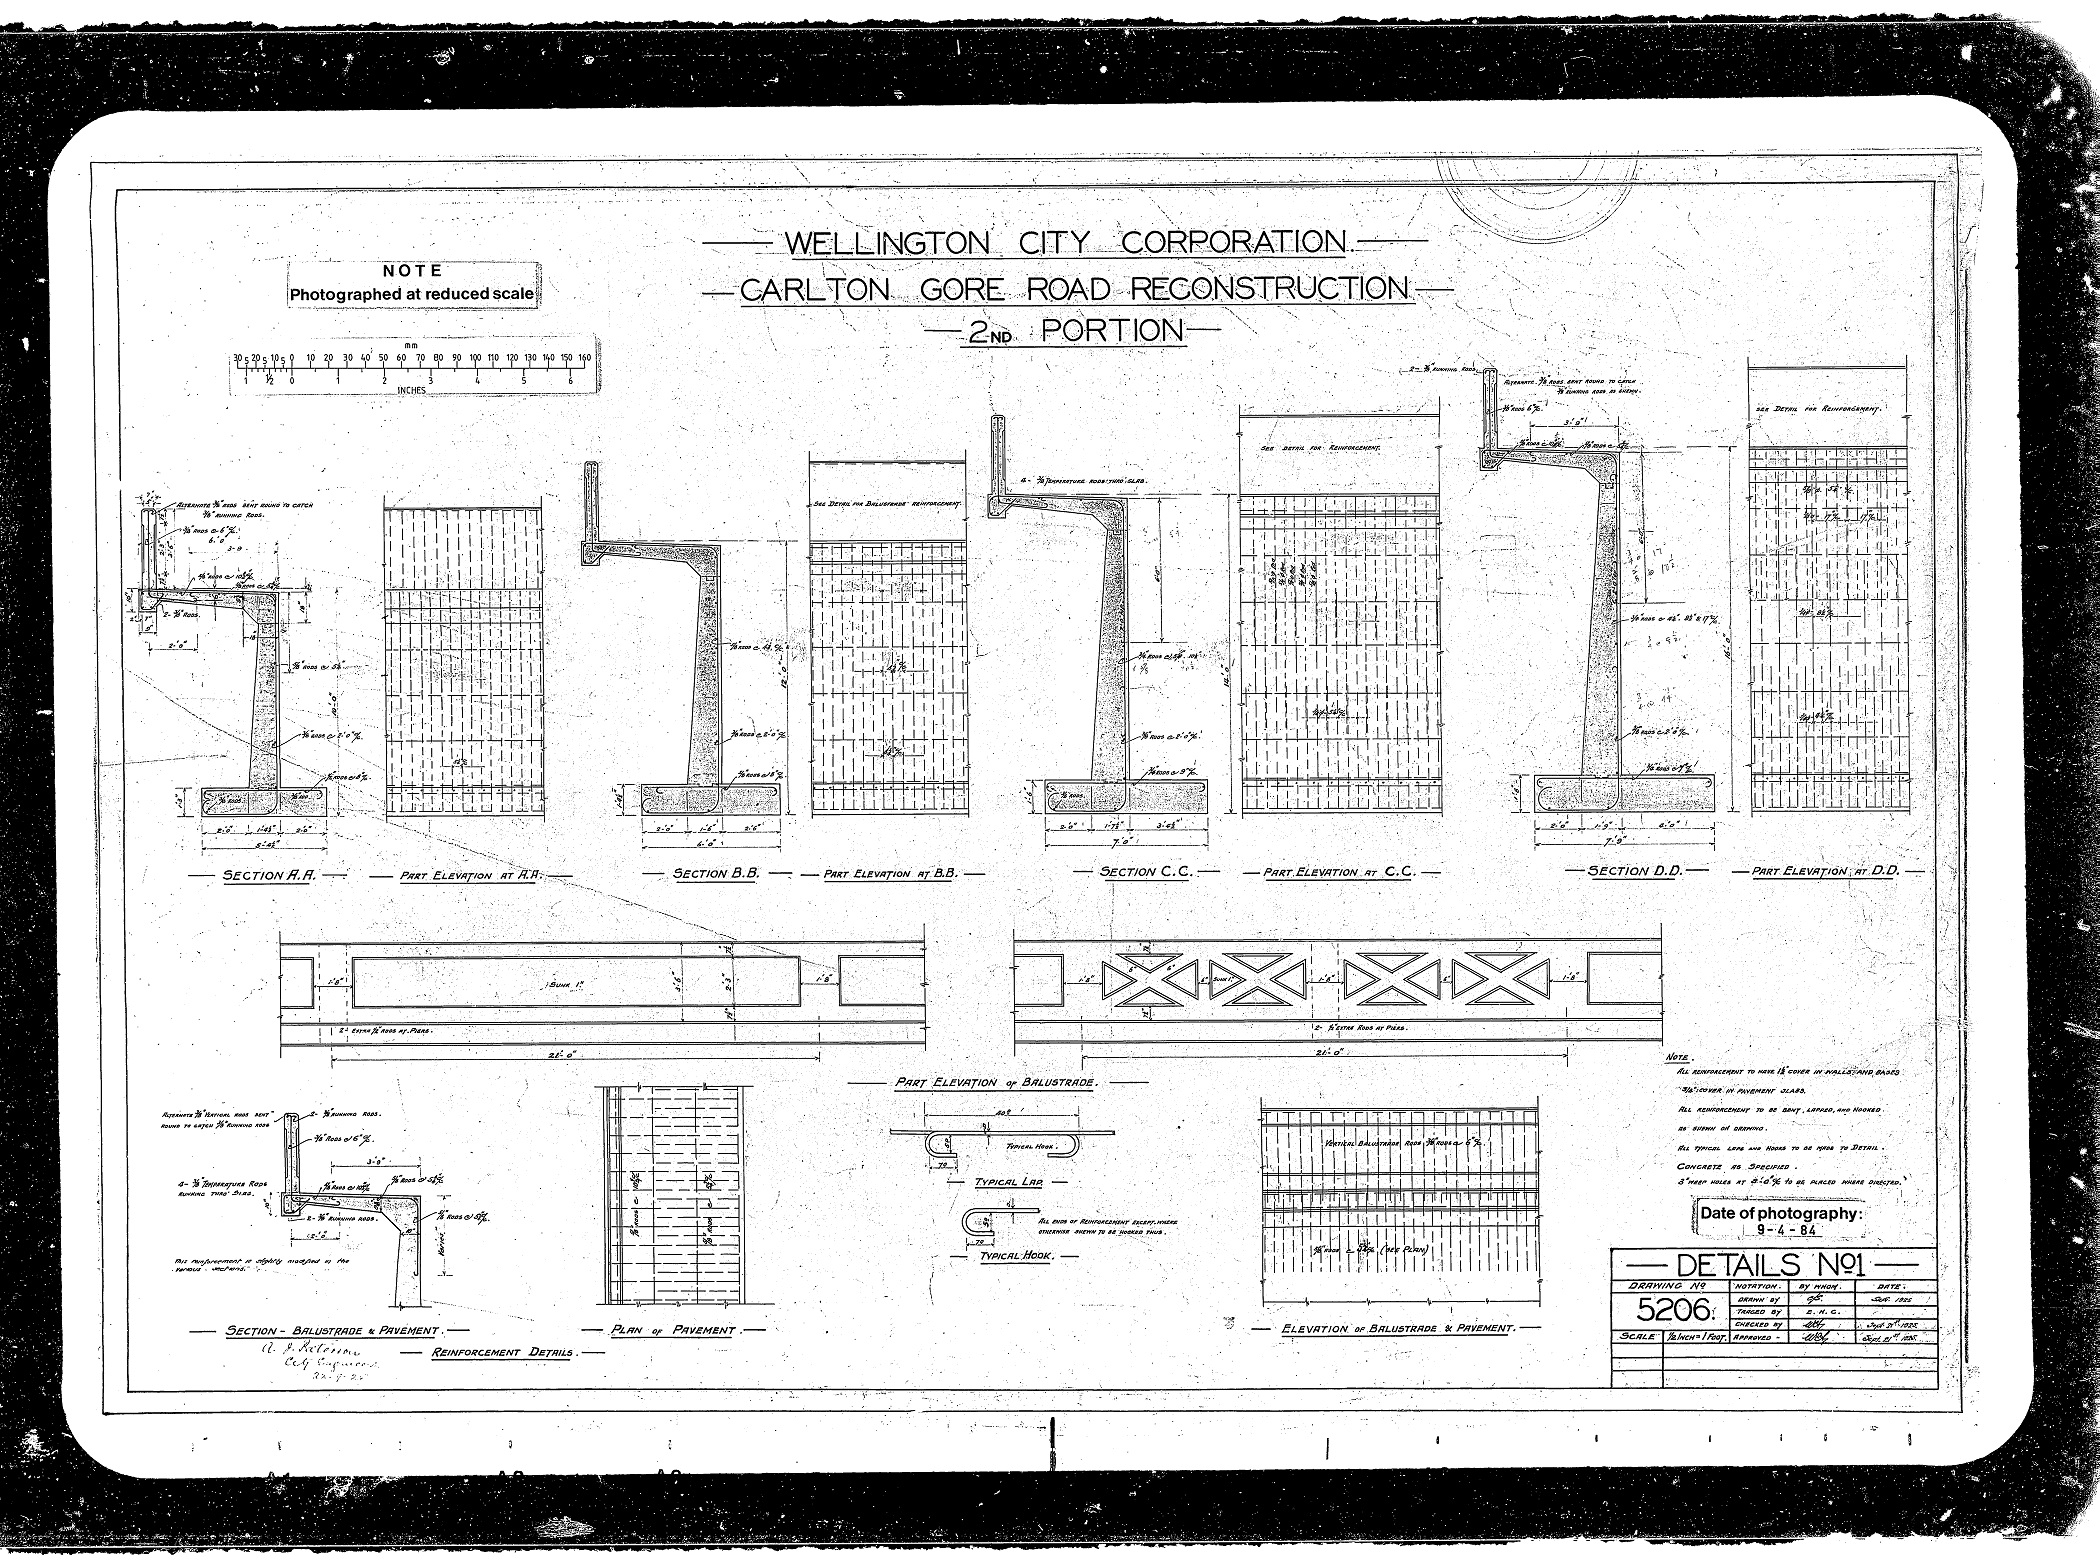 Original Plans: WCC Archives reference 00107_1_442